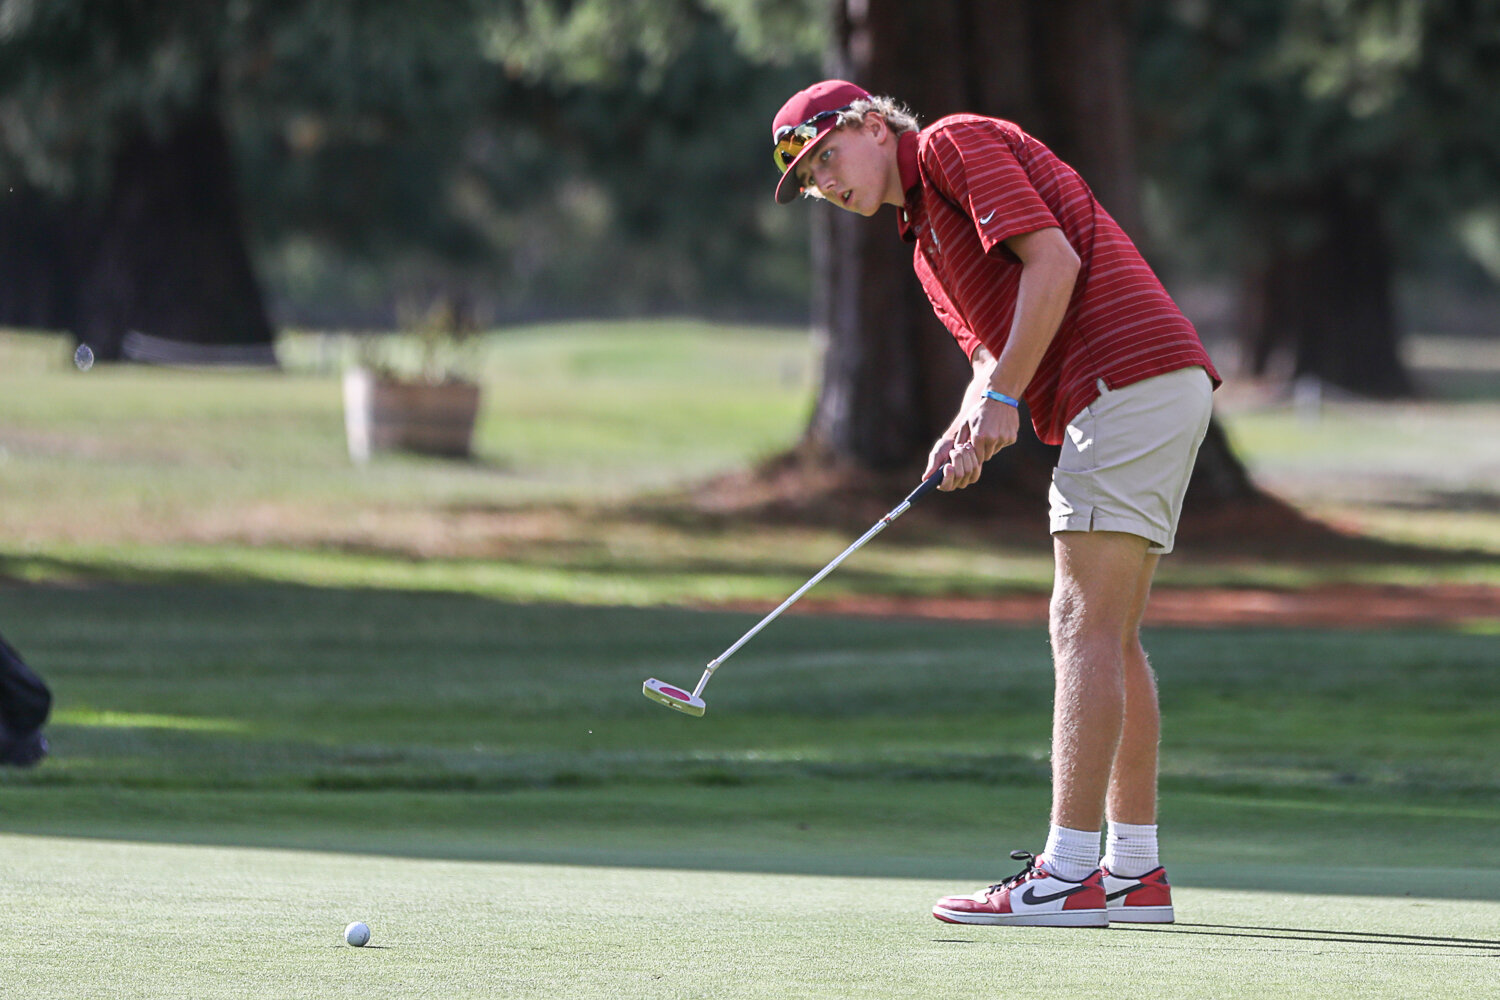 W.F. West's Weston Potter putts the ball during the Bearcats' matchup with Centralia at Riverside Golf Course on Sept. 20.